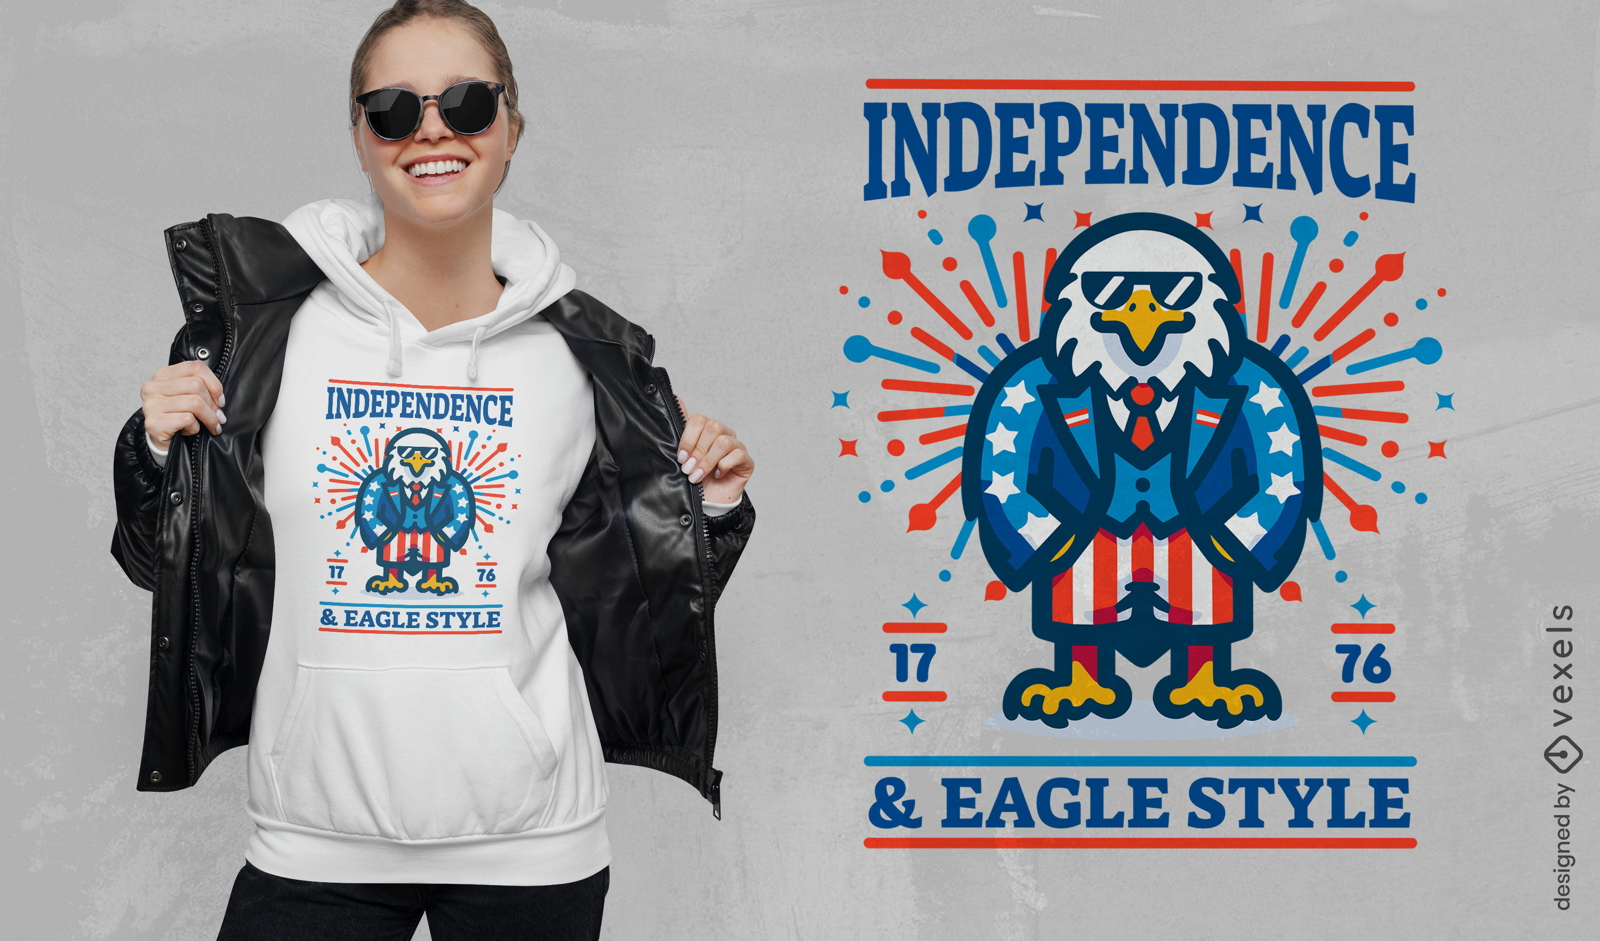 Independence & eagle style t-shirt design